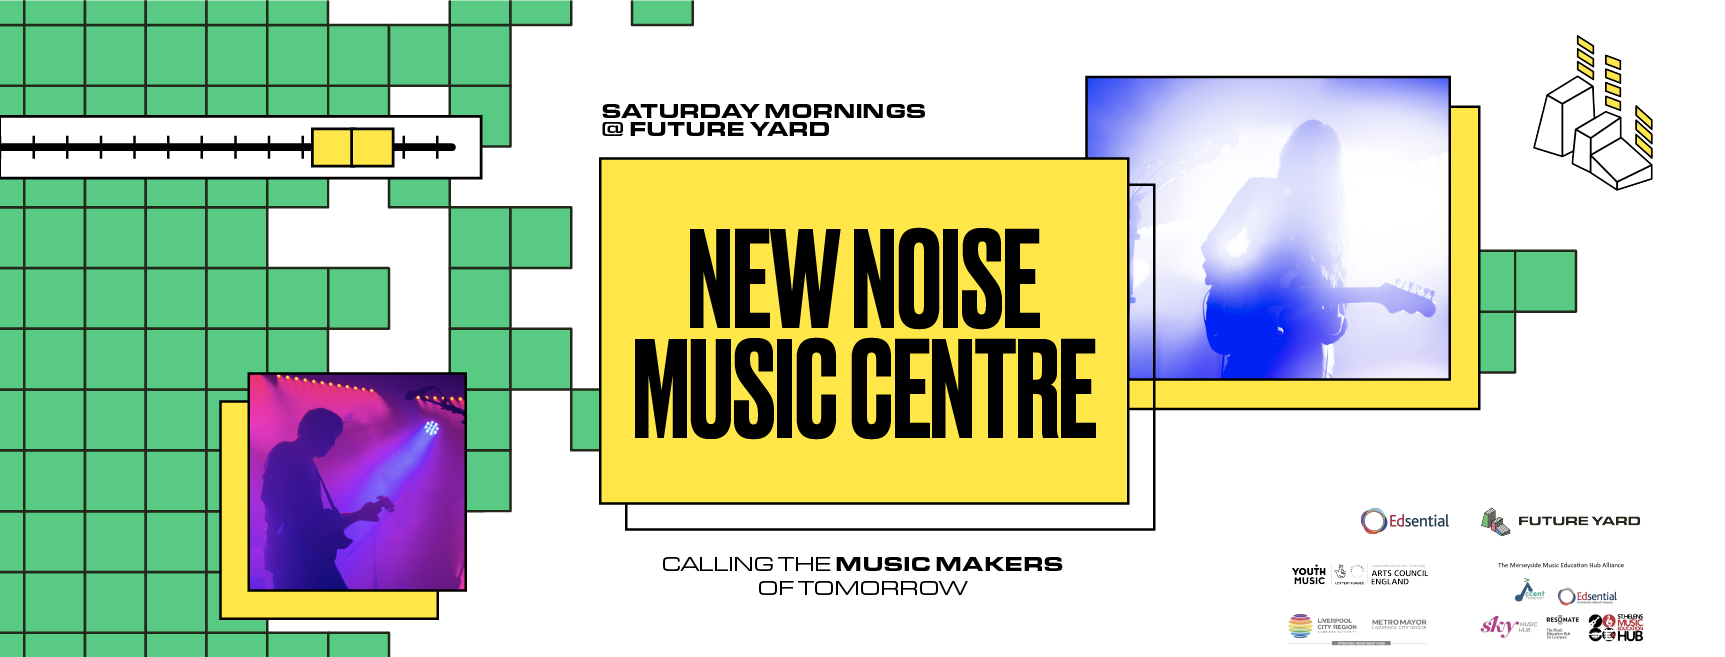 New Noise Music Centre at Future Yard